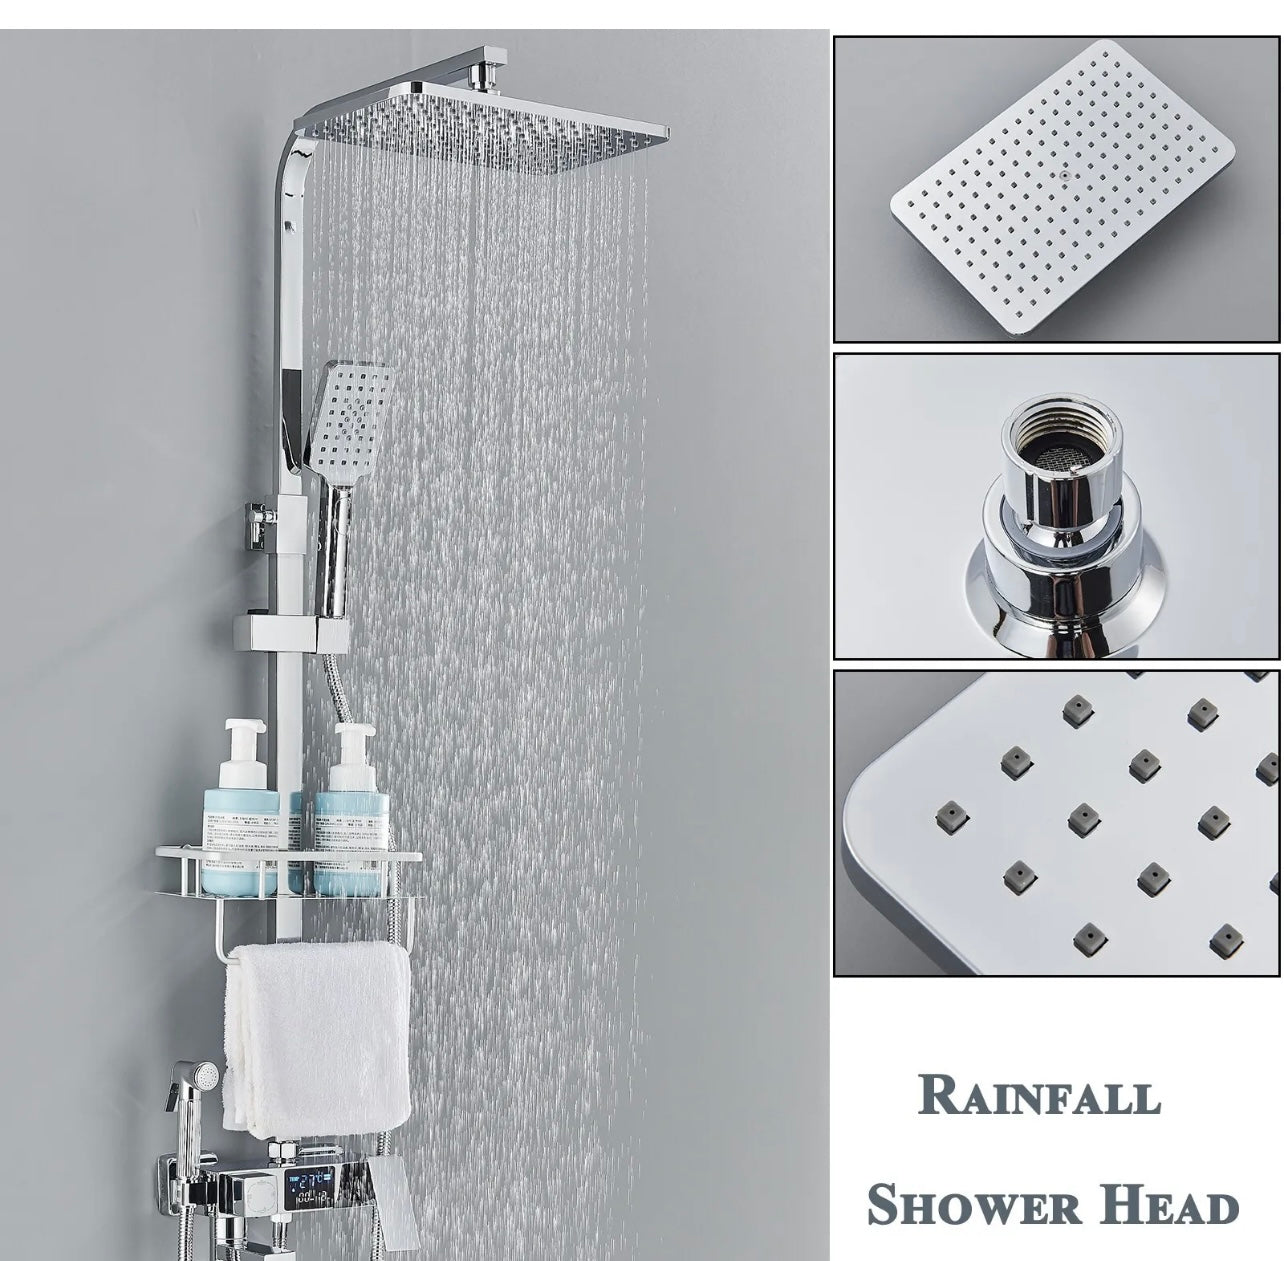 4 In 1 Rainfall Exposed Shower System With LCD Display & Shower Caddy